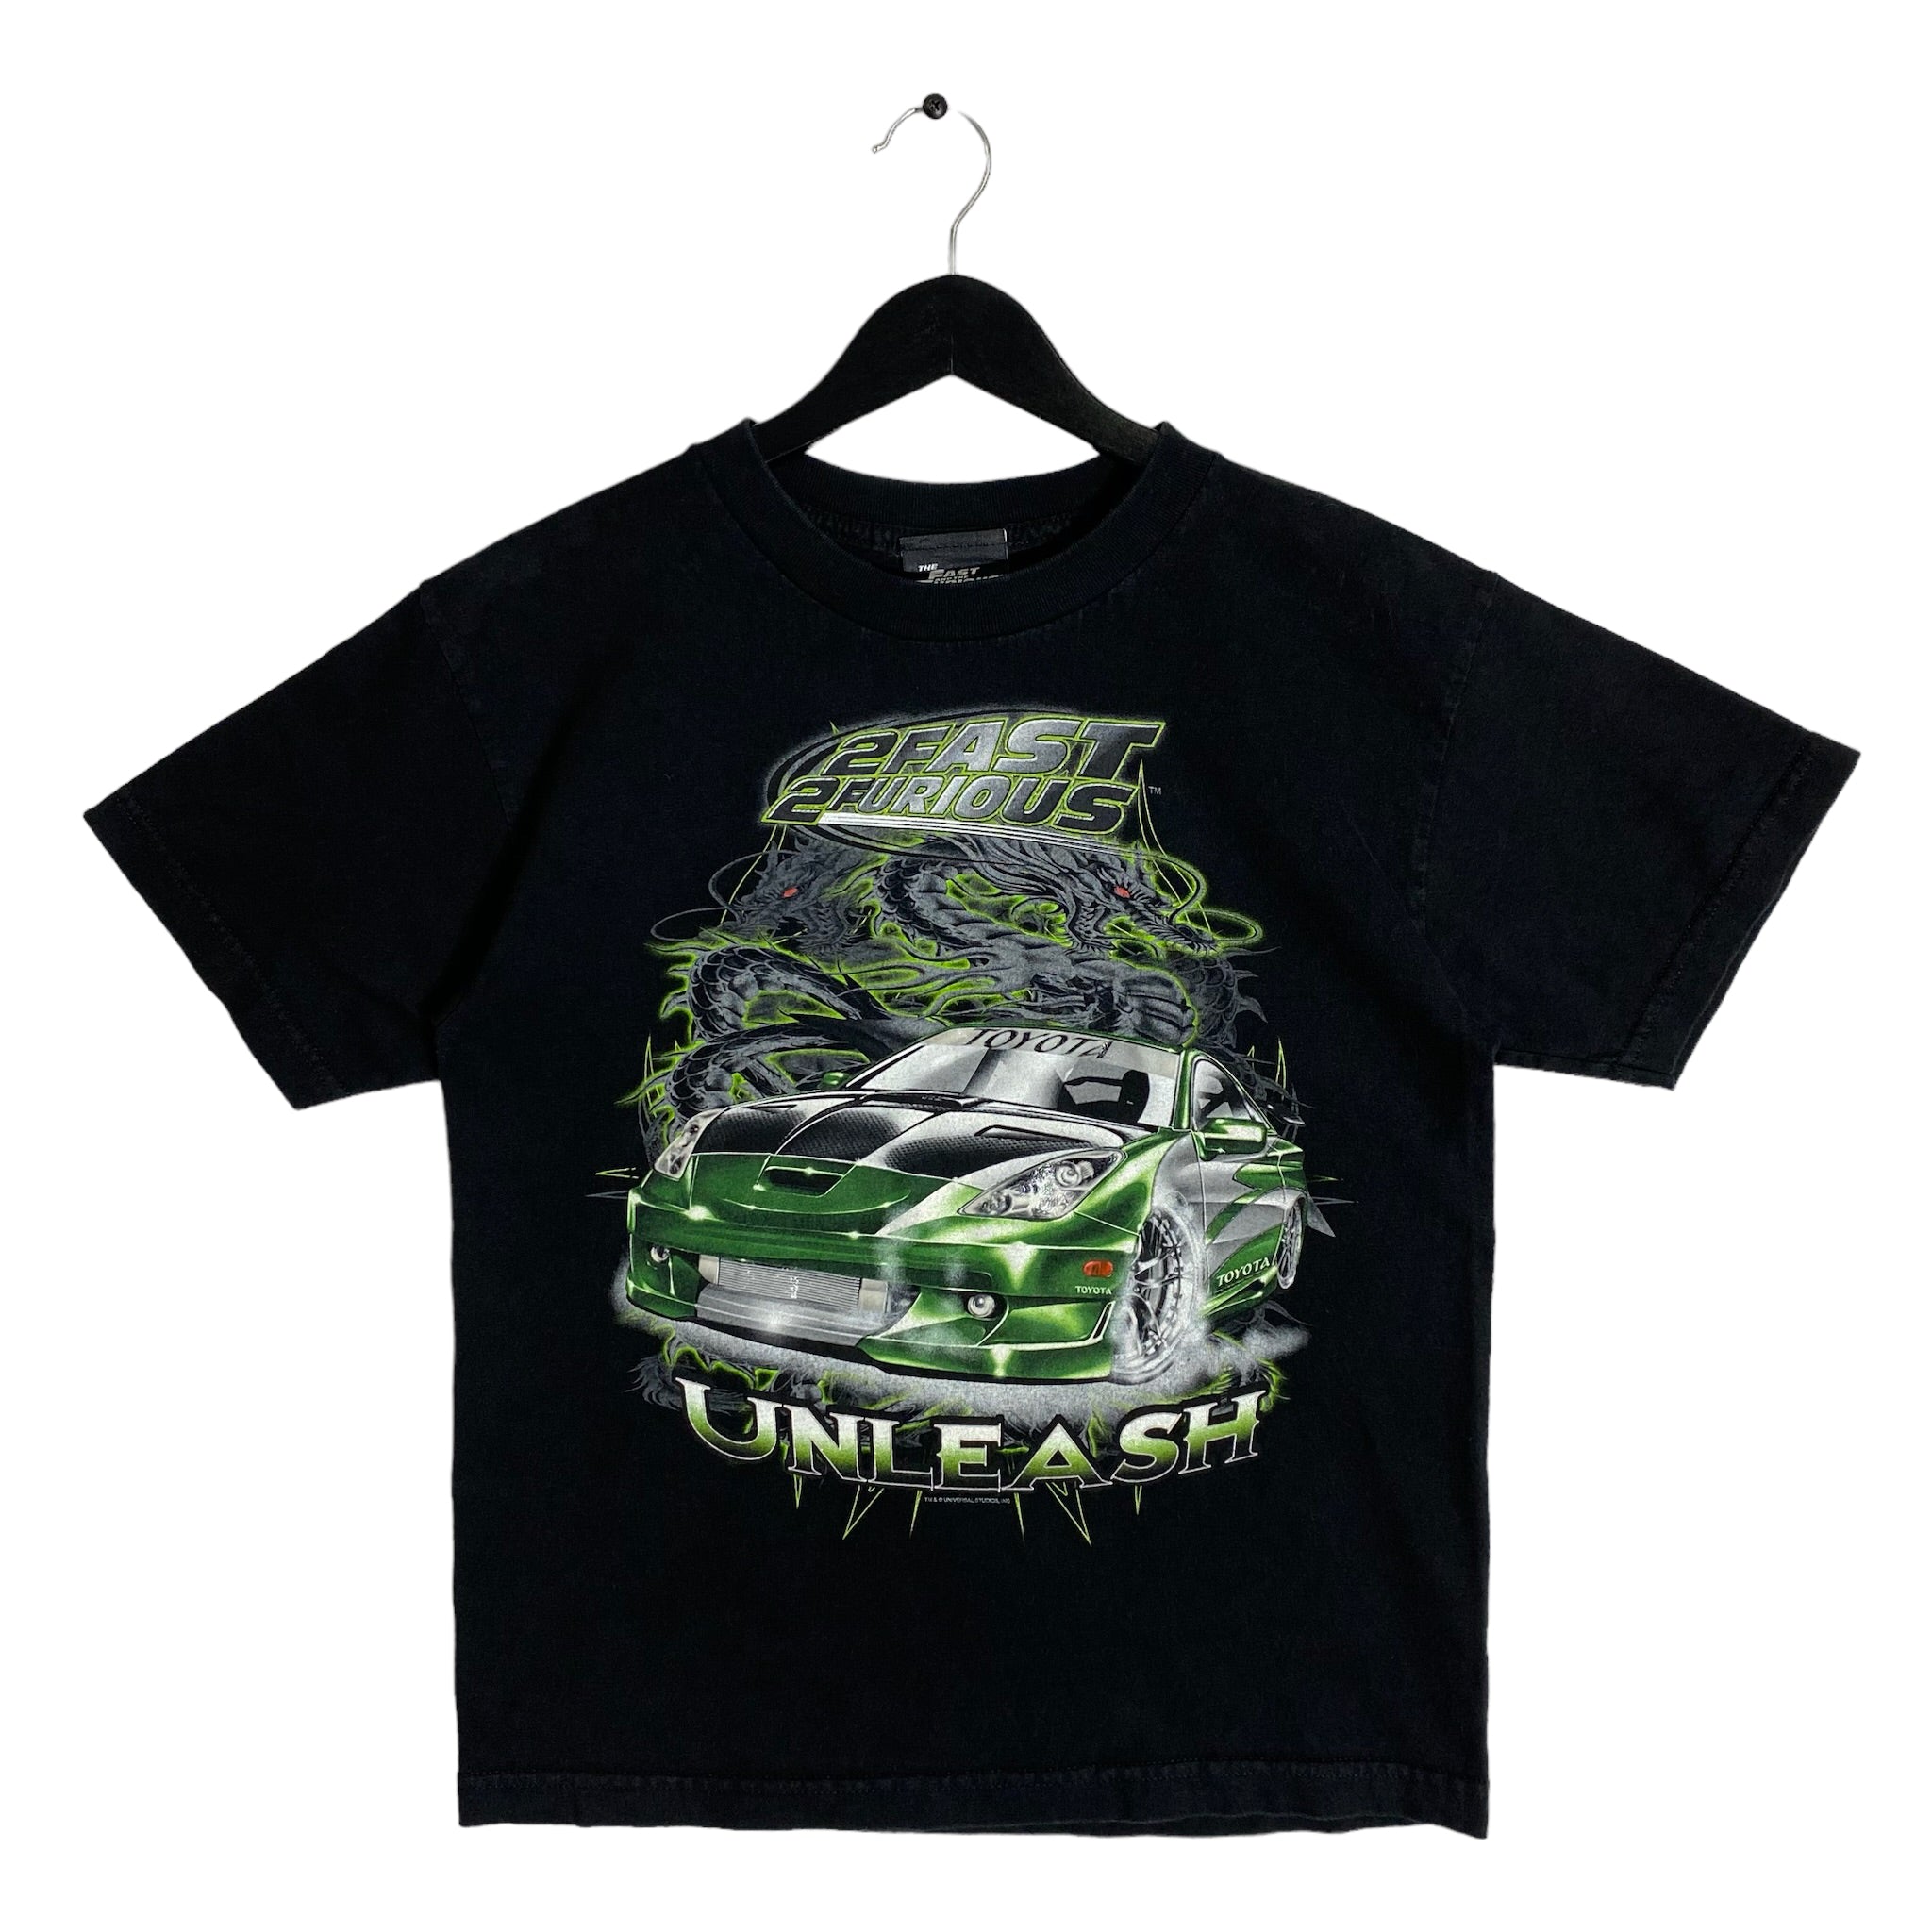 Vintage "2 Fast 2 Furious" Youth Racing Tee